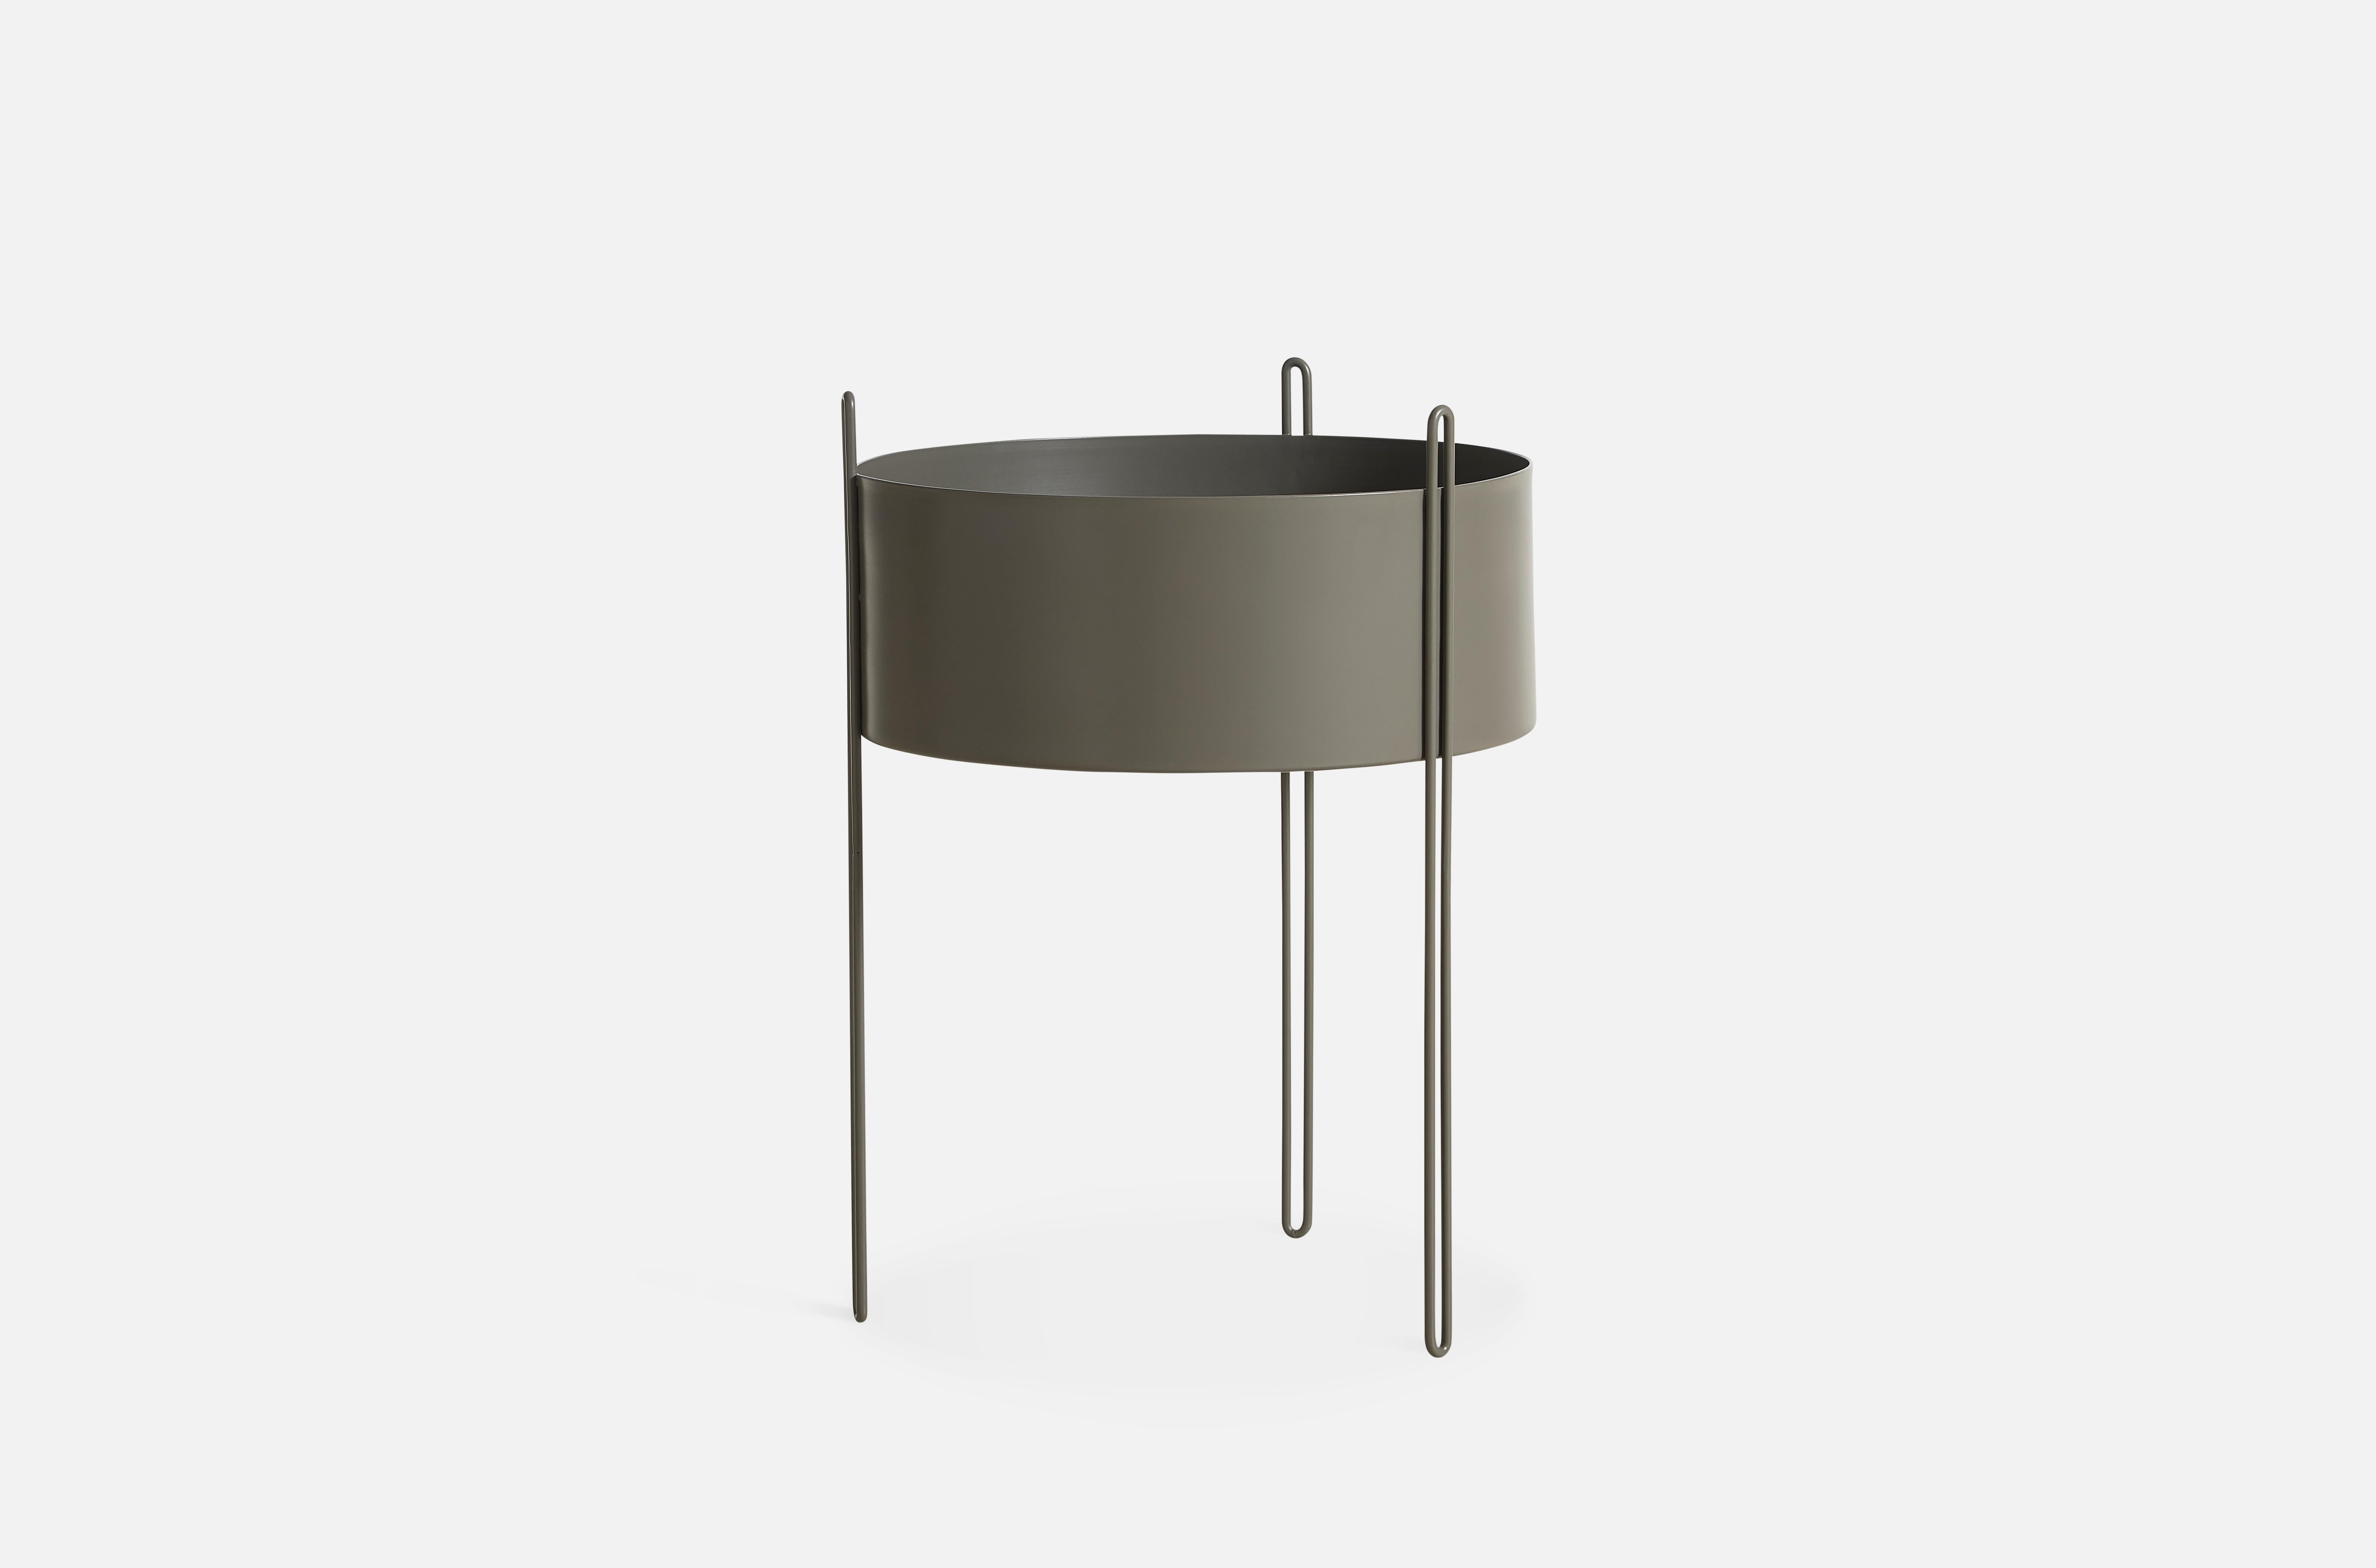 Large taupe pidestall planter by Emilie Stahl Carlsen.
Materials: metal.
Dimensions: D 40 x H 55 cm.
Available in grey, red, taupe or black and in 3 sizes: D 15 x H 15, D 40 x H 35, D 40 x H 55 cm.

Emilie Stahl Carlsen is a Nor wegian designer